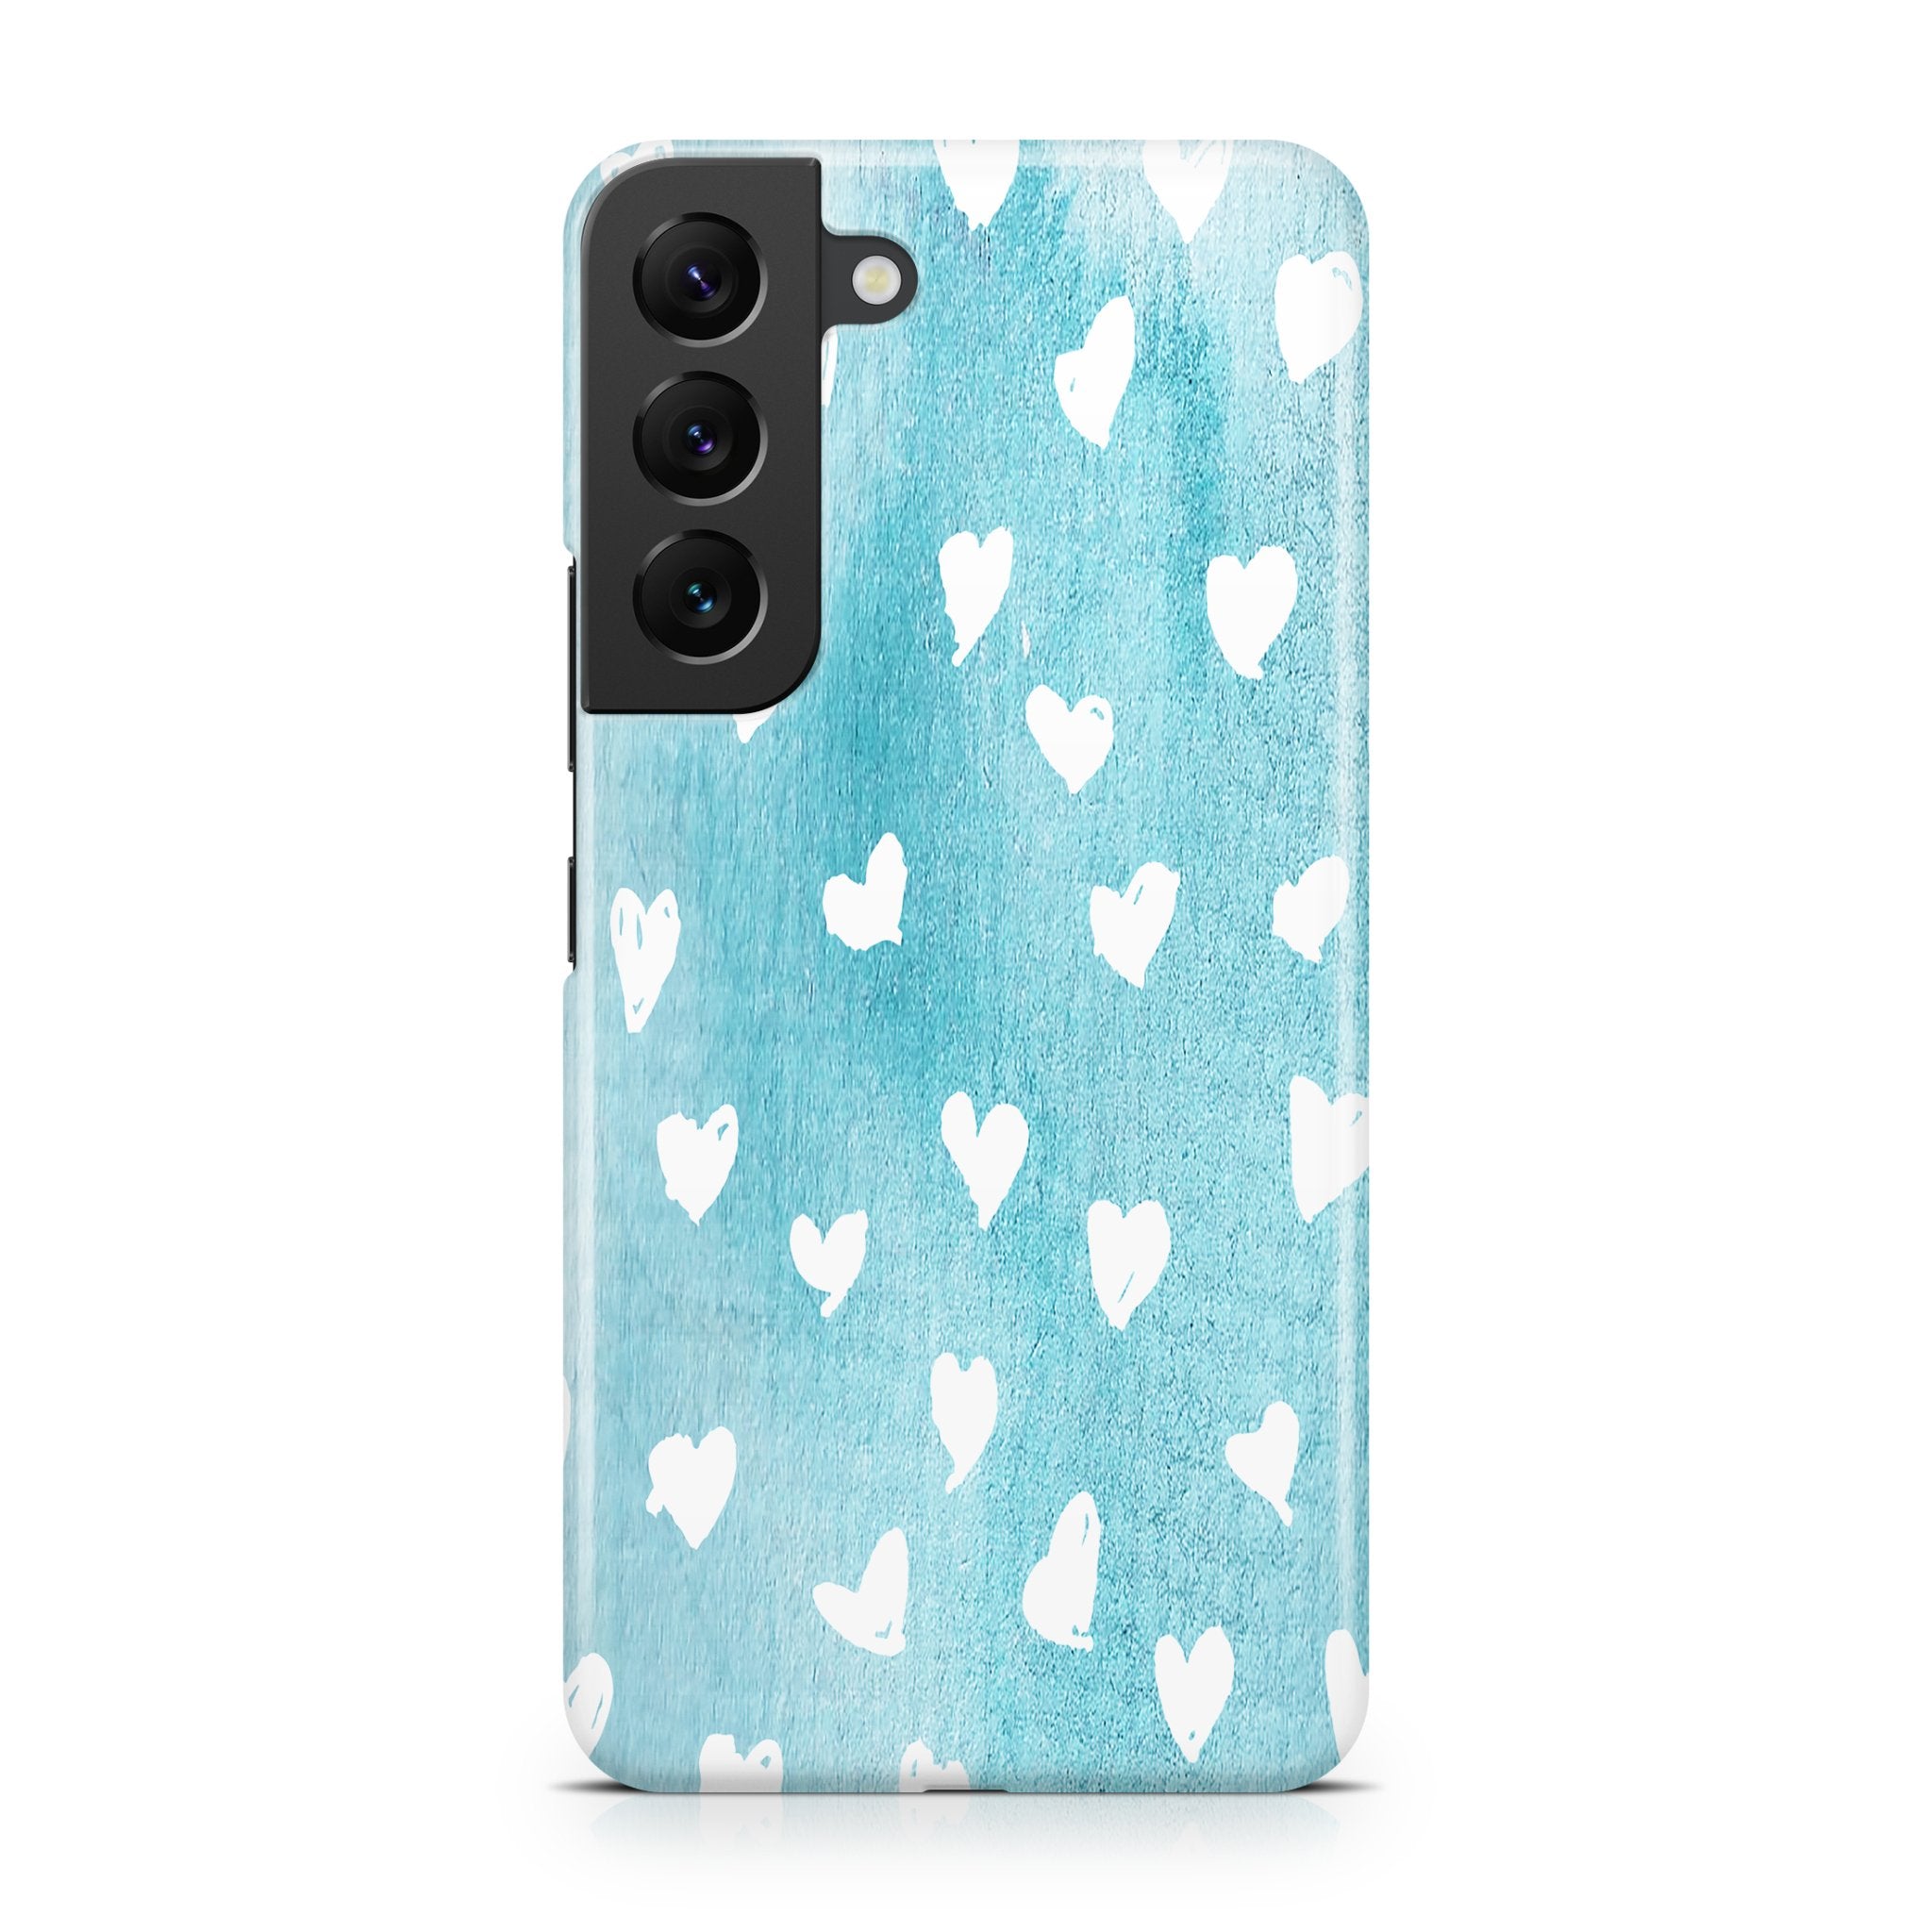 Blue Heart - Samsung phone case designs by CaseSwagger